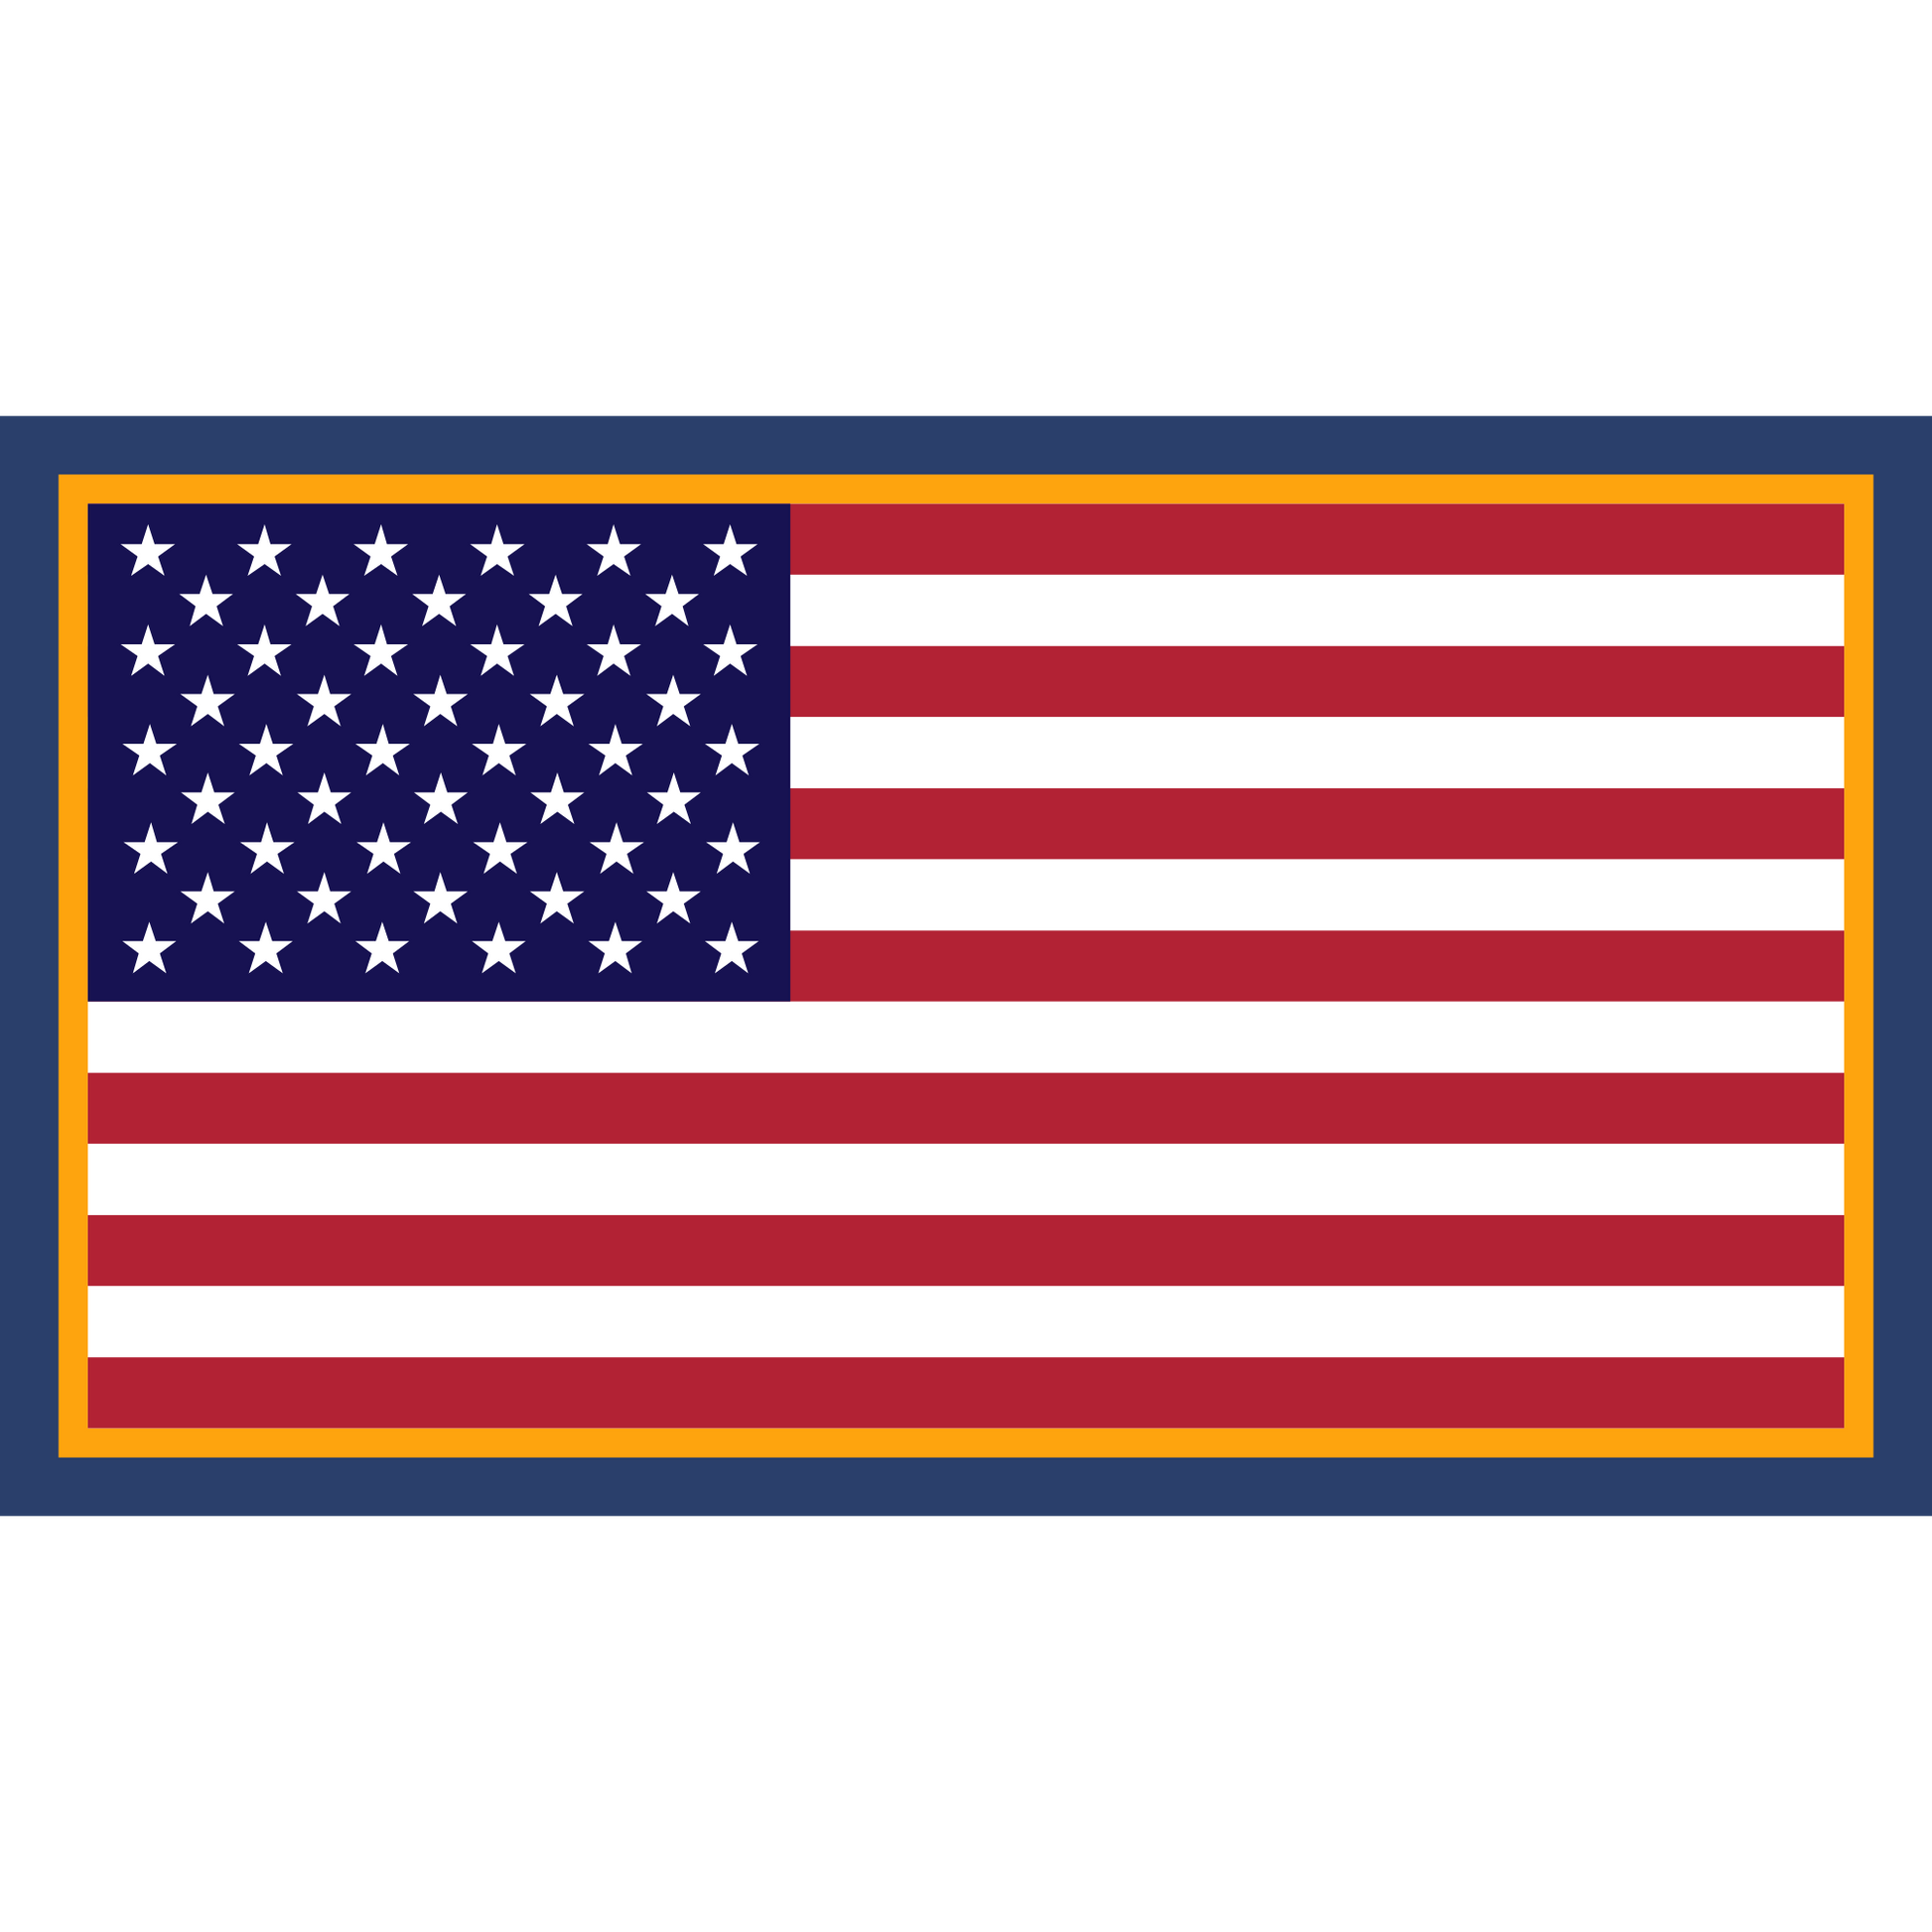 Stars and Stripes Flag Patches – Modern Arms